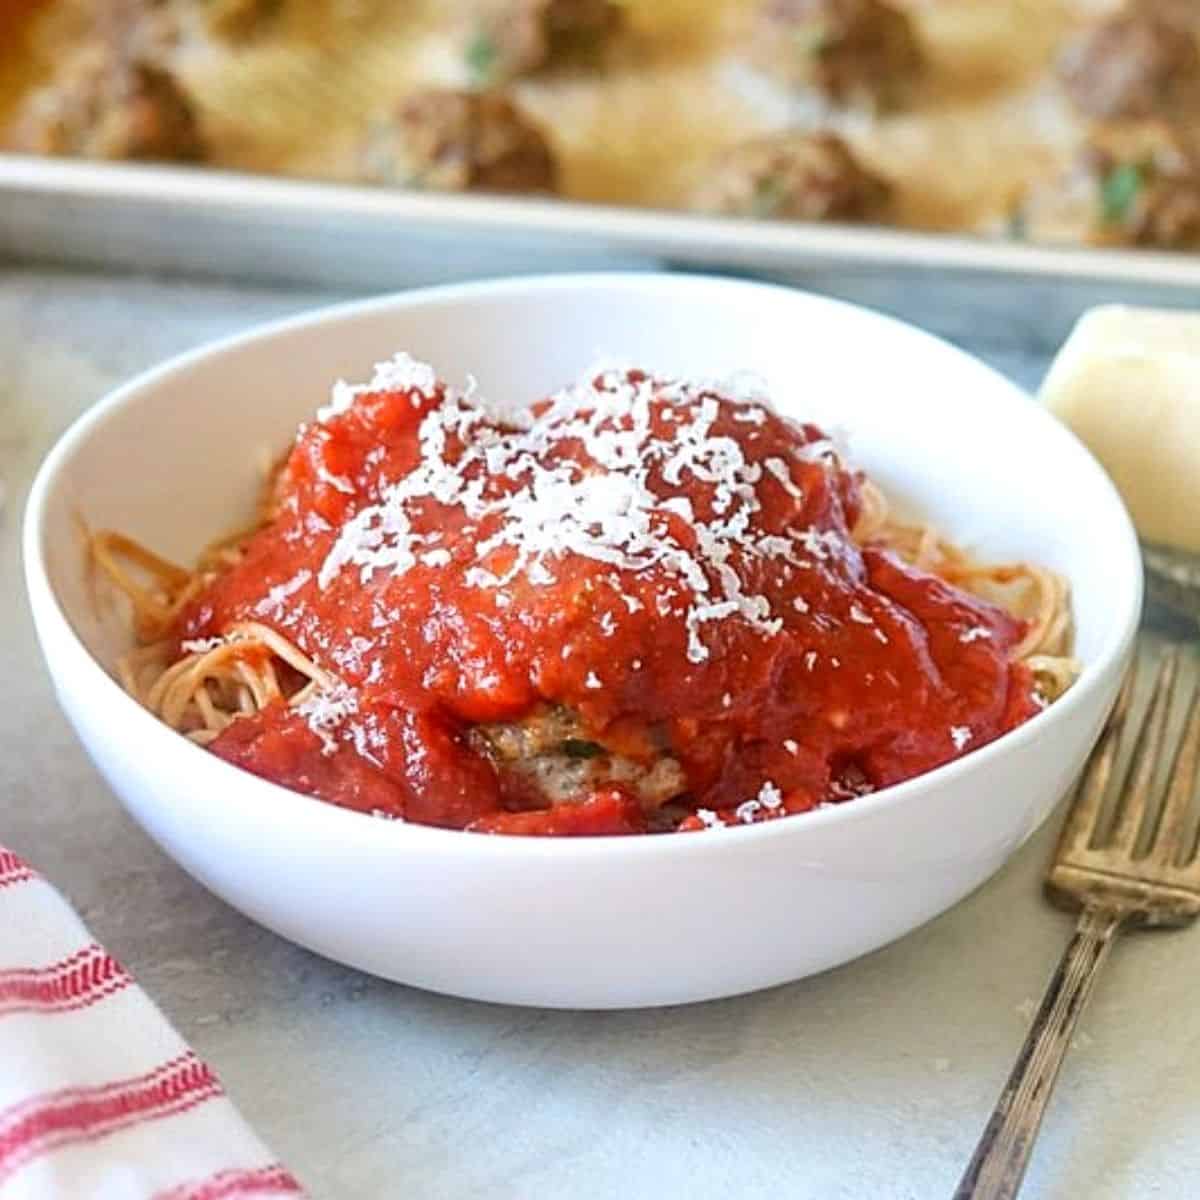 Bowls of homemade spaghetti meatballs next to baking tray with baked meatballs.